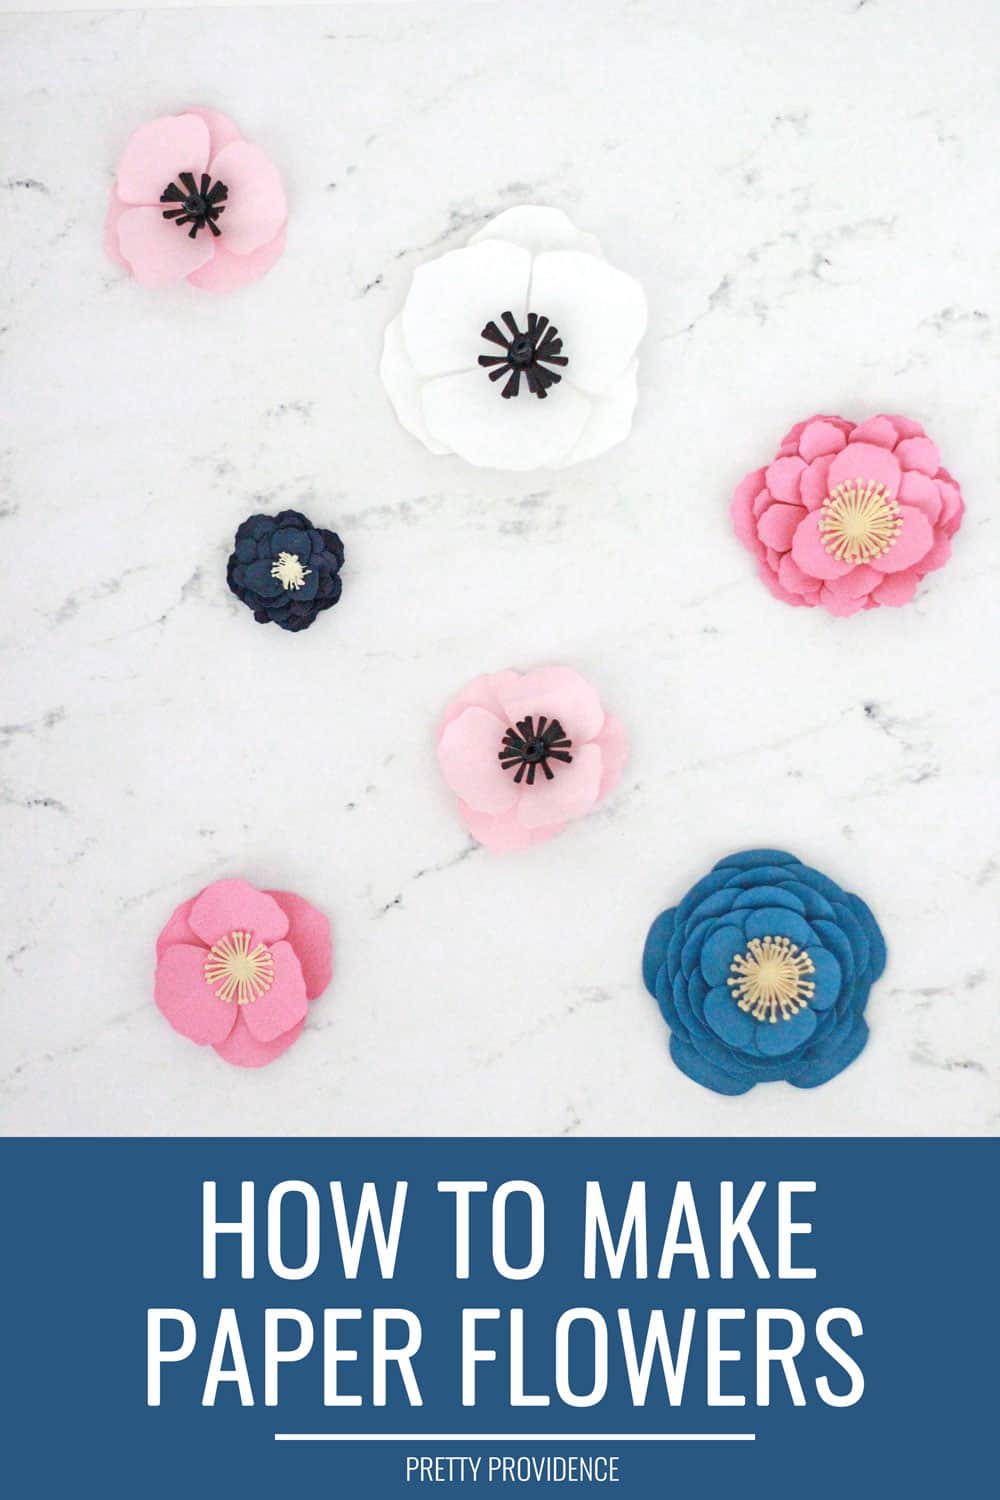 How to make paper flowers out of card stock! Step by step tutorial on how to make flowers with with a Cricut.